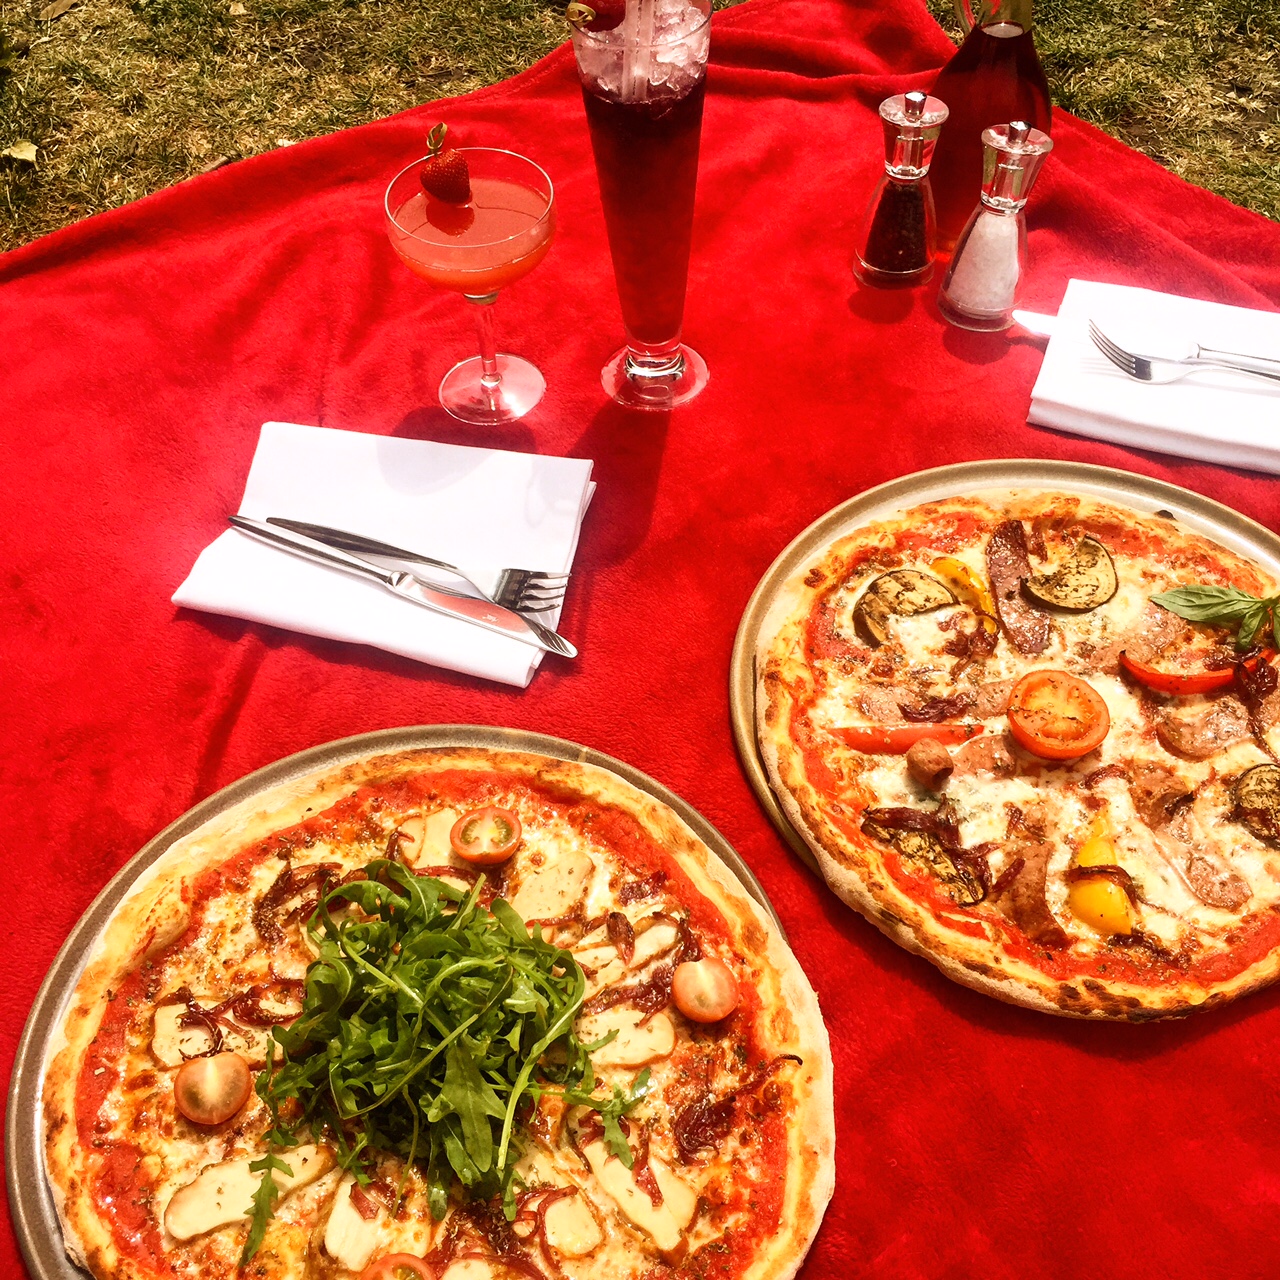 Rocket Pizza Picnic London Reviews and Things To Do